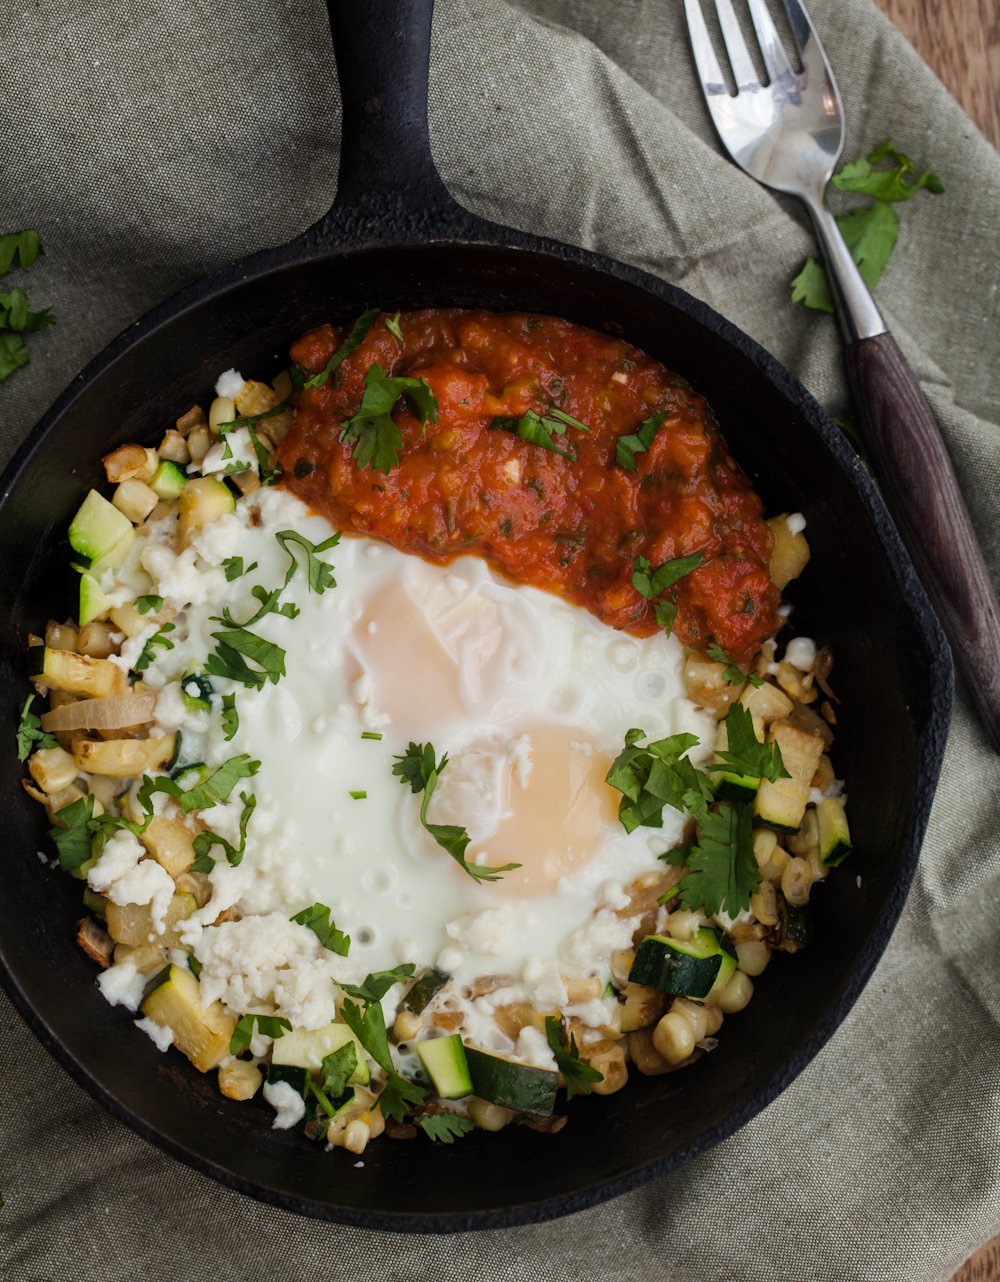 A simple one skillet meal to use up all of that extra zucchini